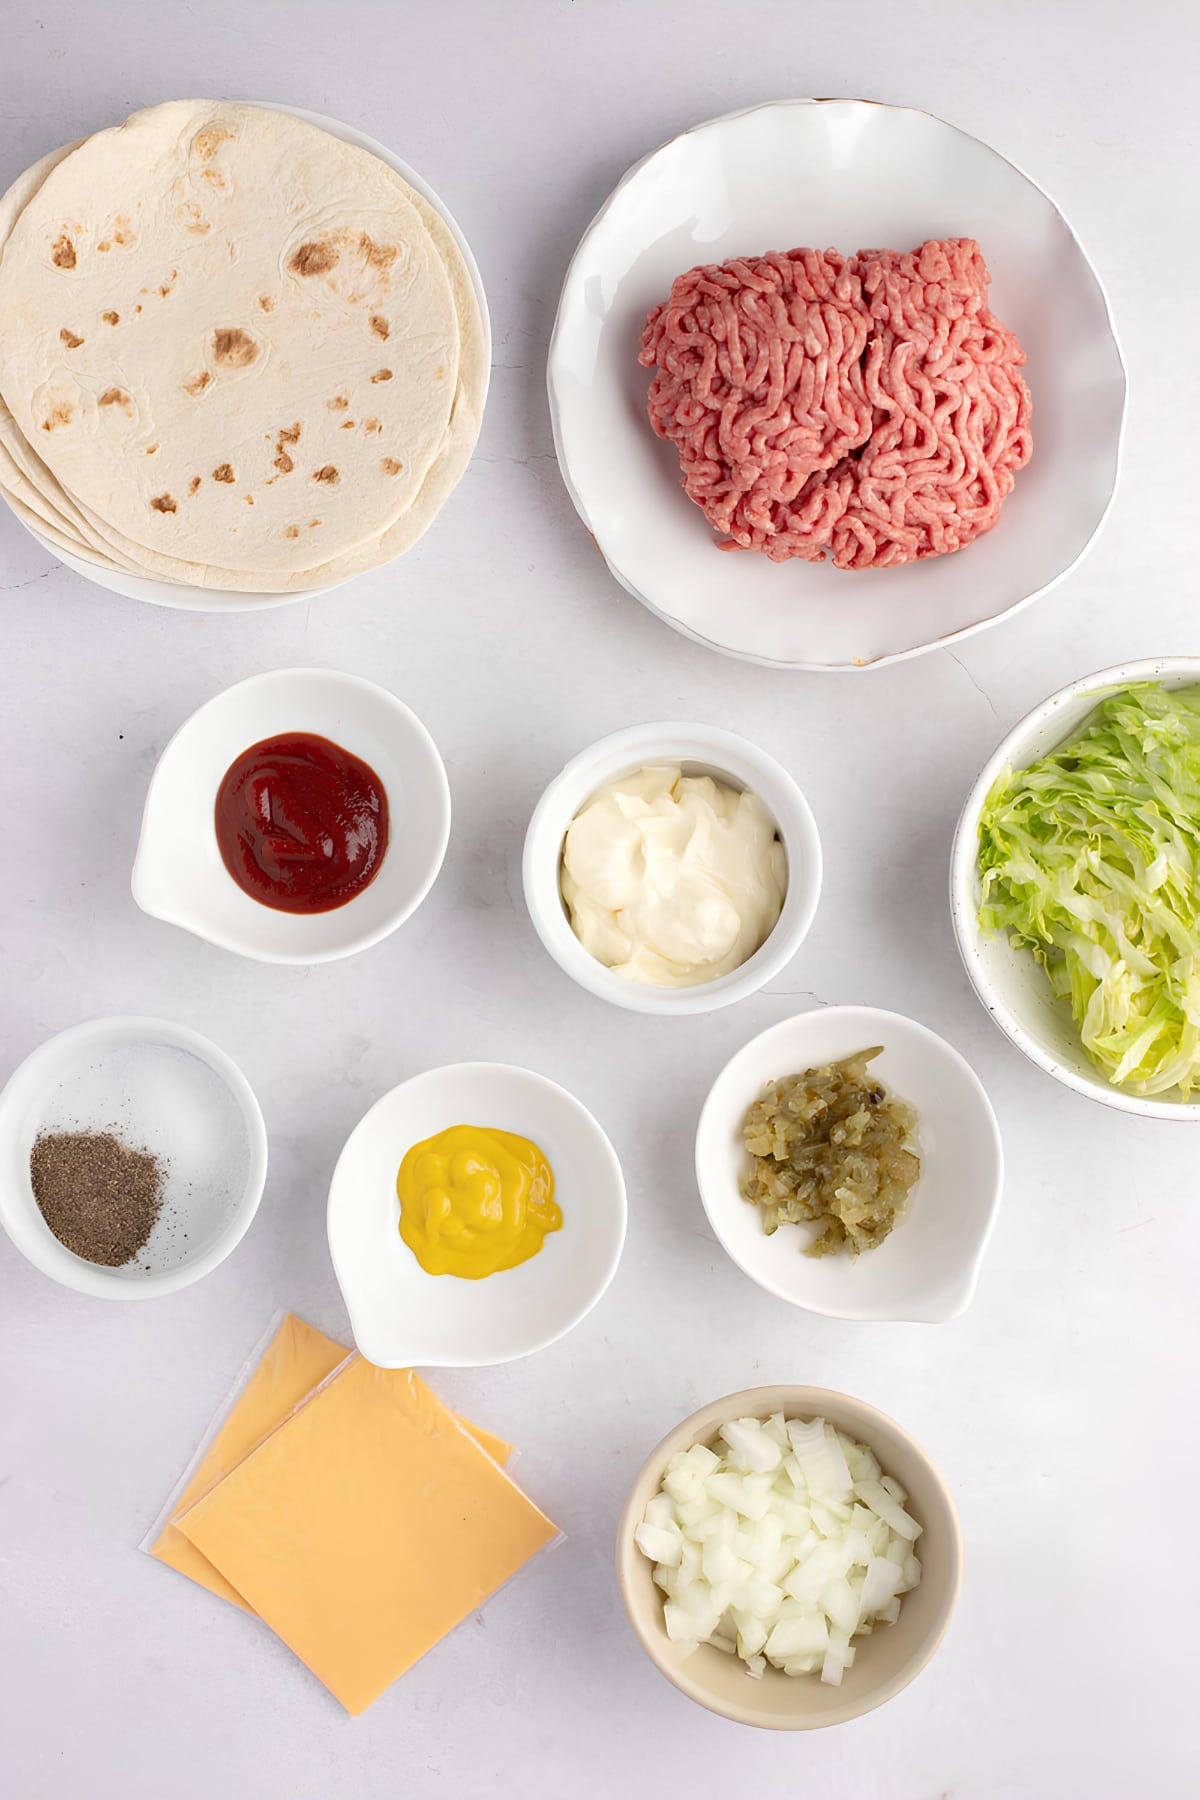 Smash Burger Taco Ingredients - Sauce, Ground Round, Seasoning, Flour Tortillas, Cheese, Lettuce and Onions